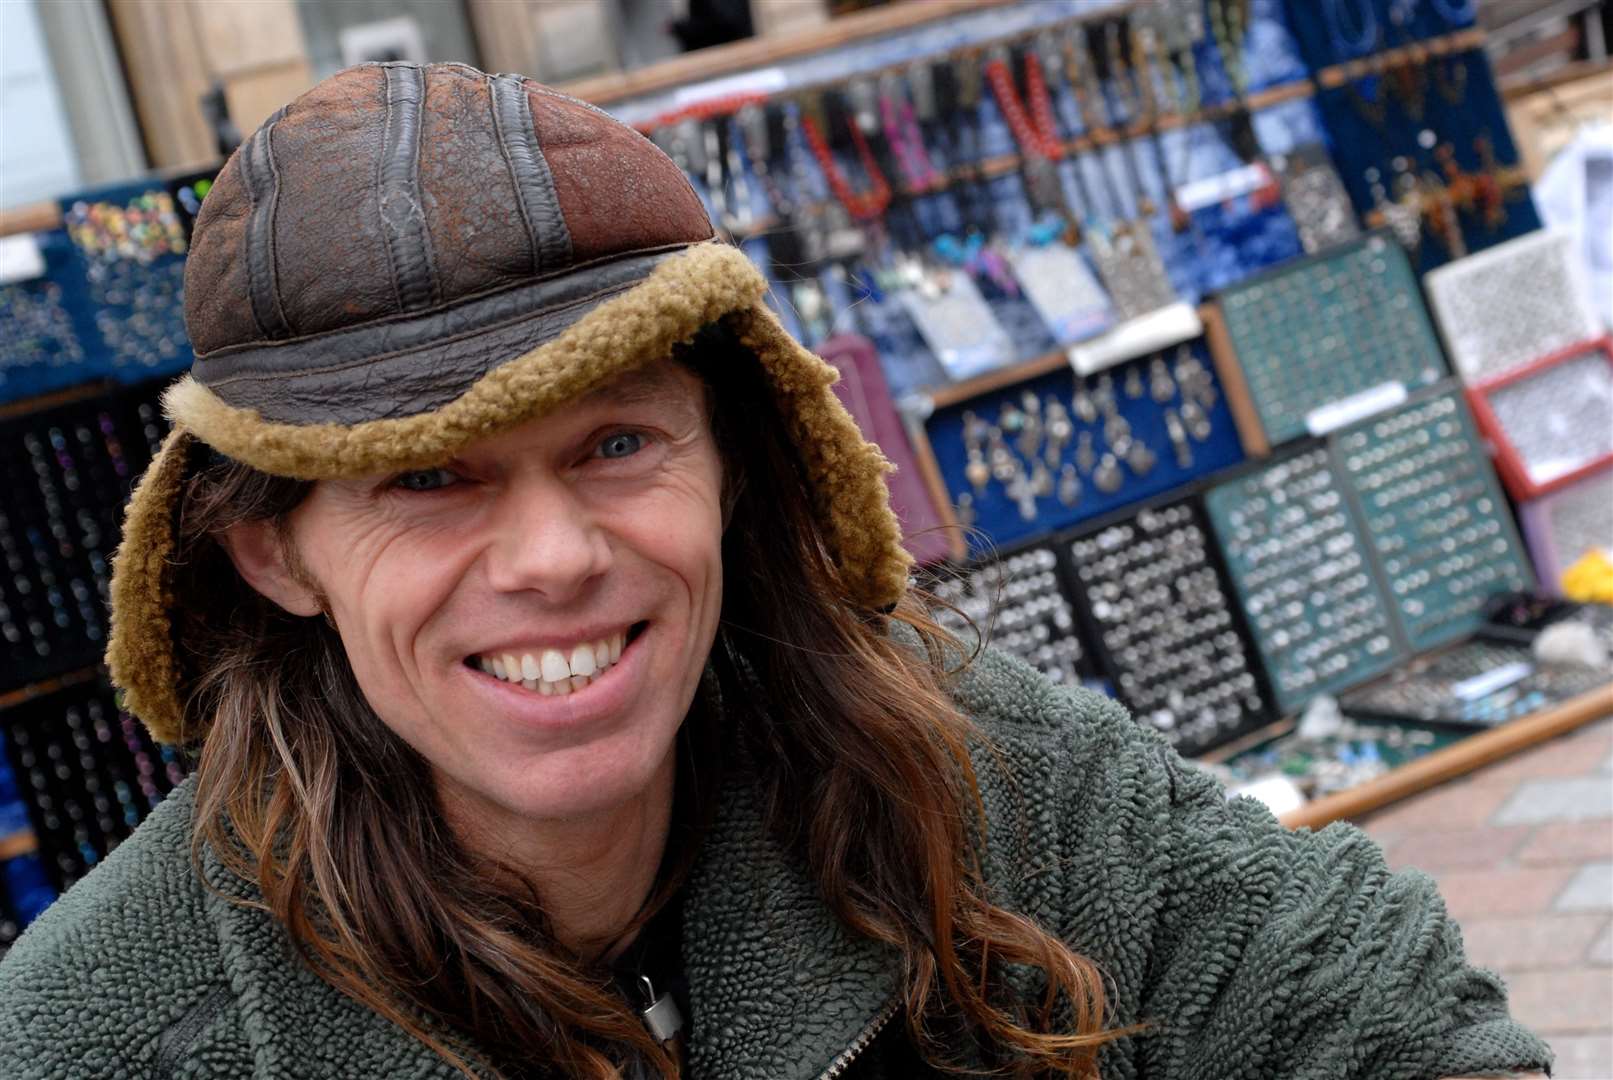 Kim Avis was a well-known figure at his stall in Inverness city centre.